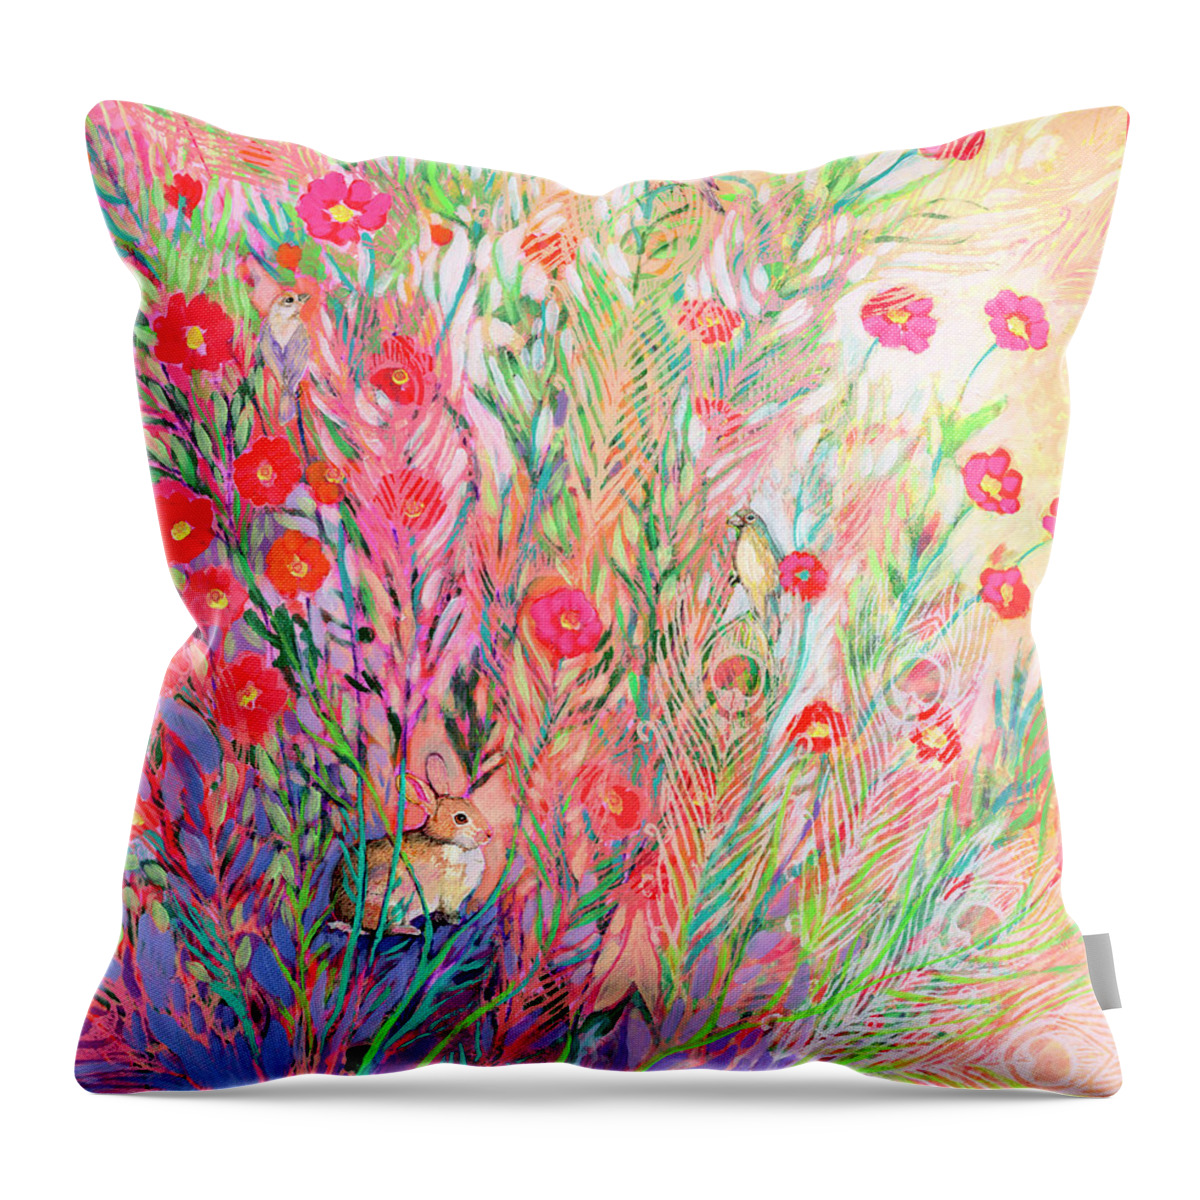 Floral Throw Pillow featuring the painting Dawn of a New Day by Jennifer Lommers